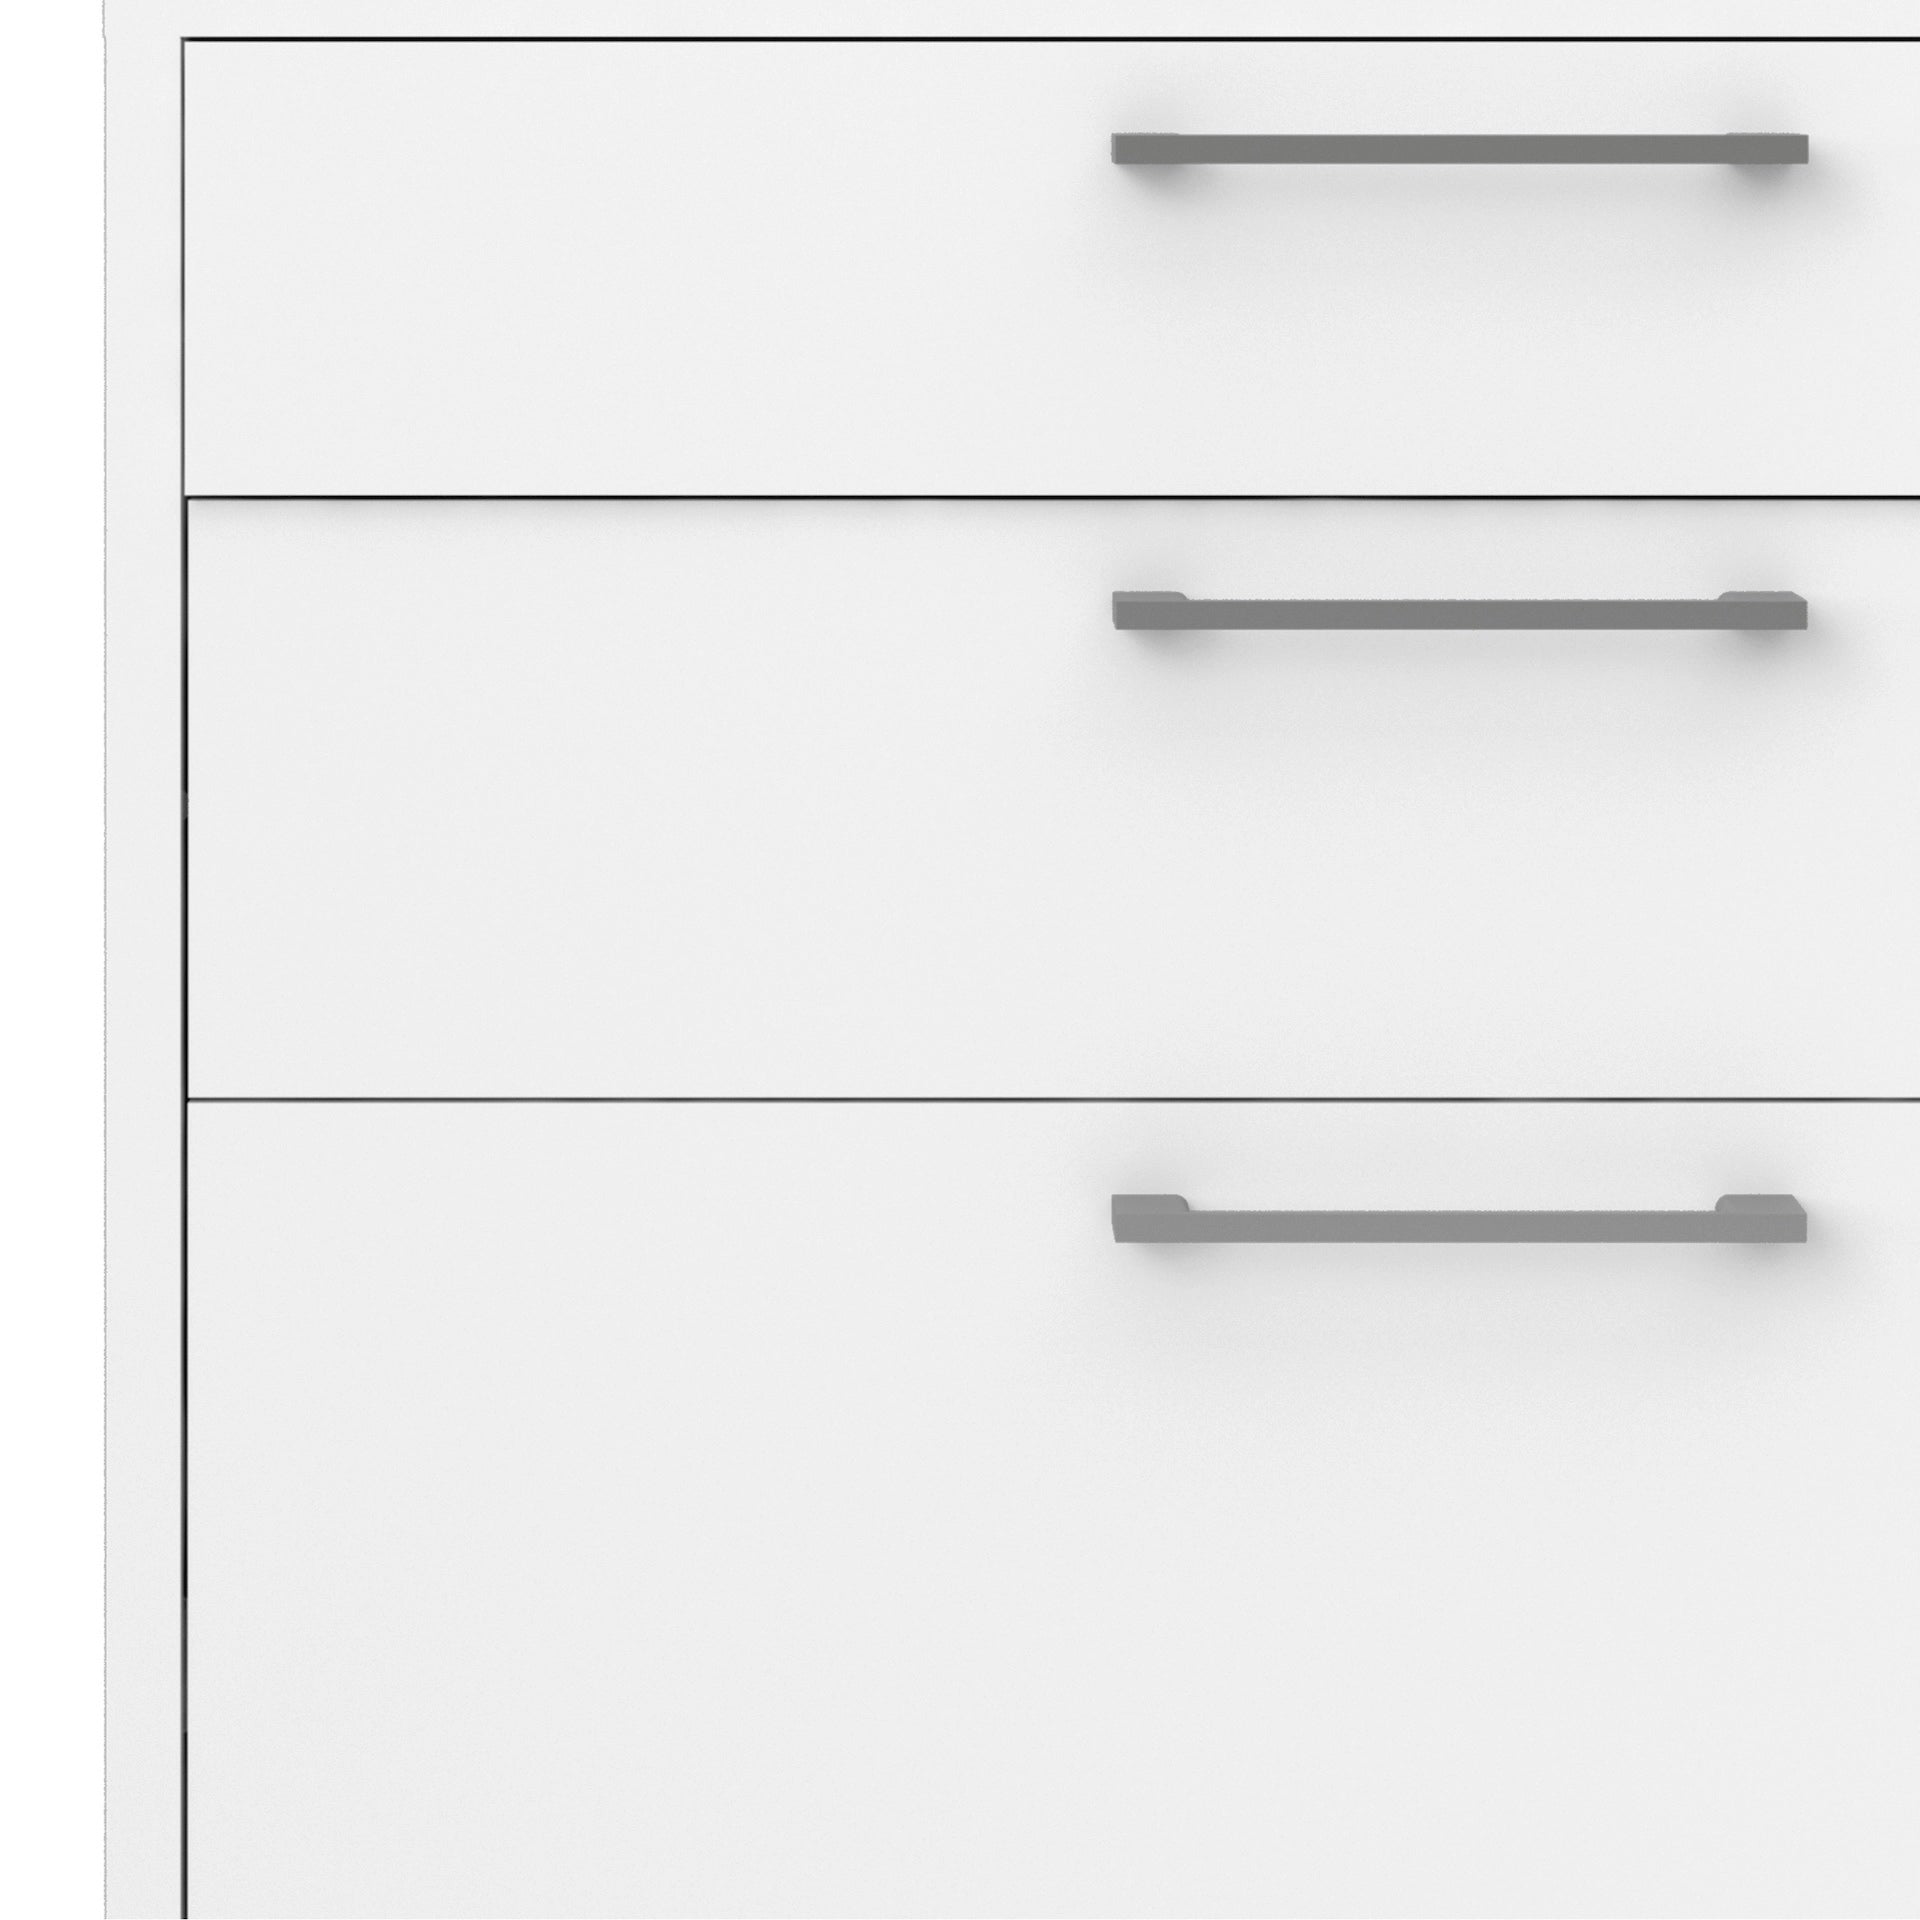 Furniture To Go Prima Bookcase 2 Shelves with 2 Drawers + 2 File Drawers in White